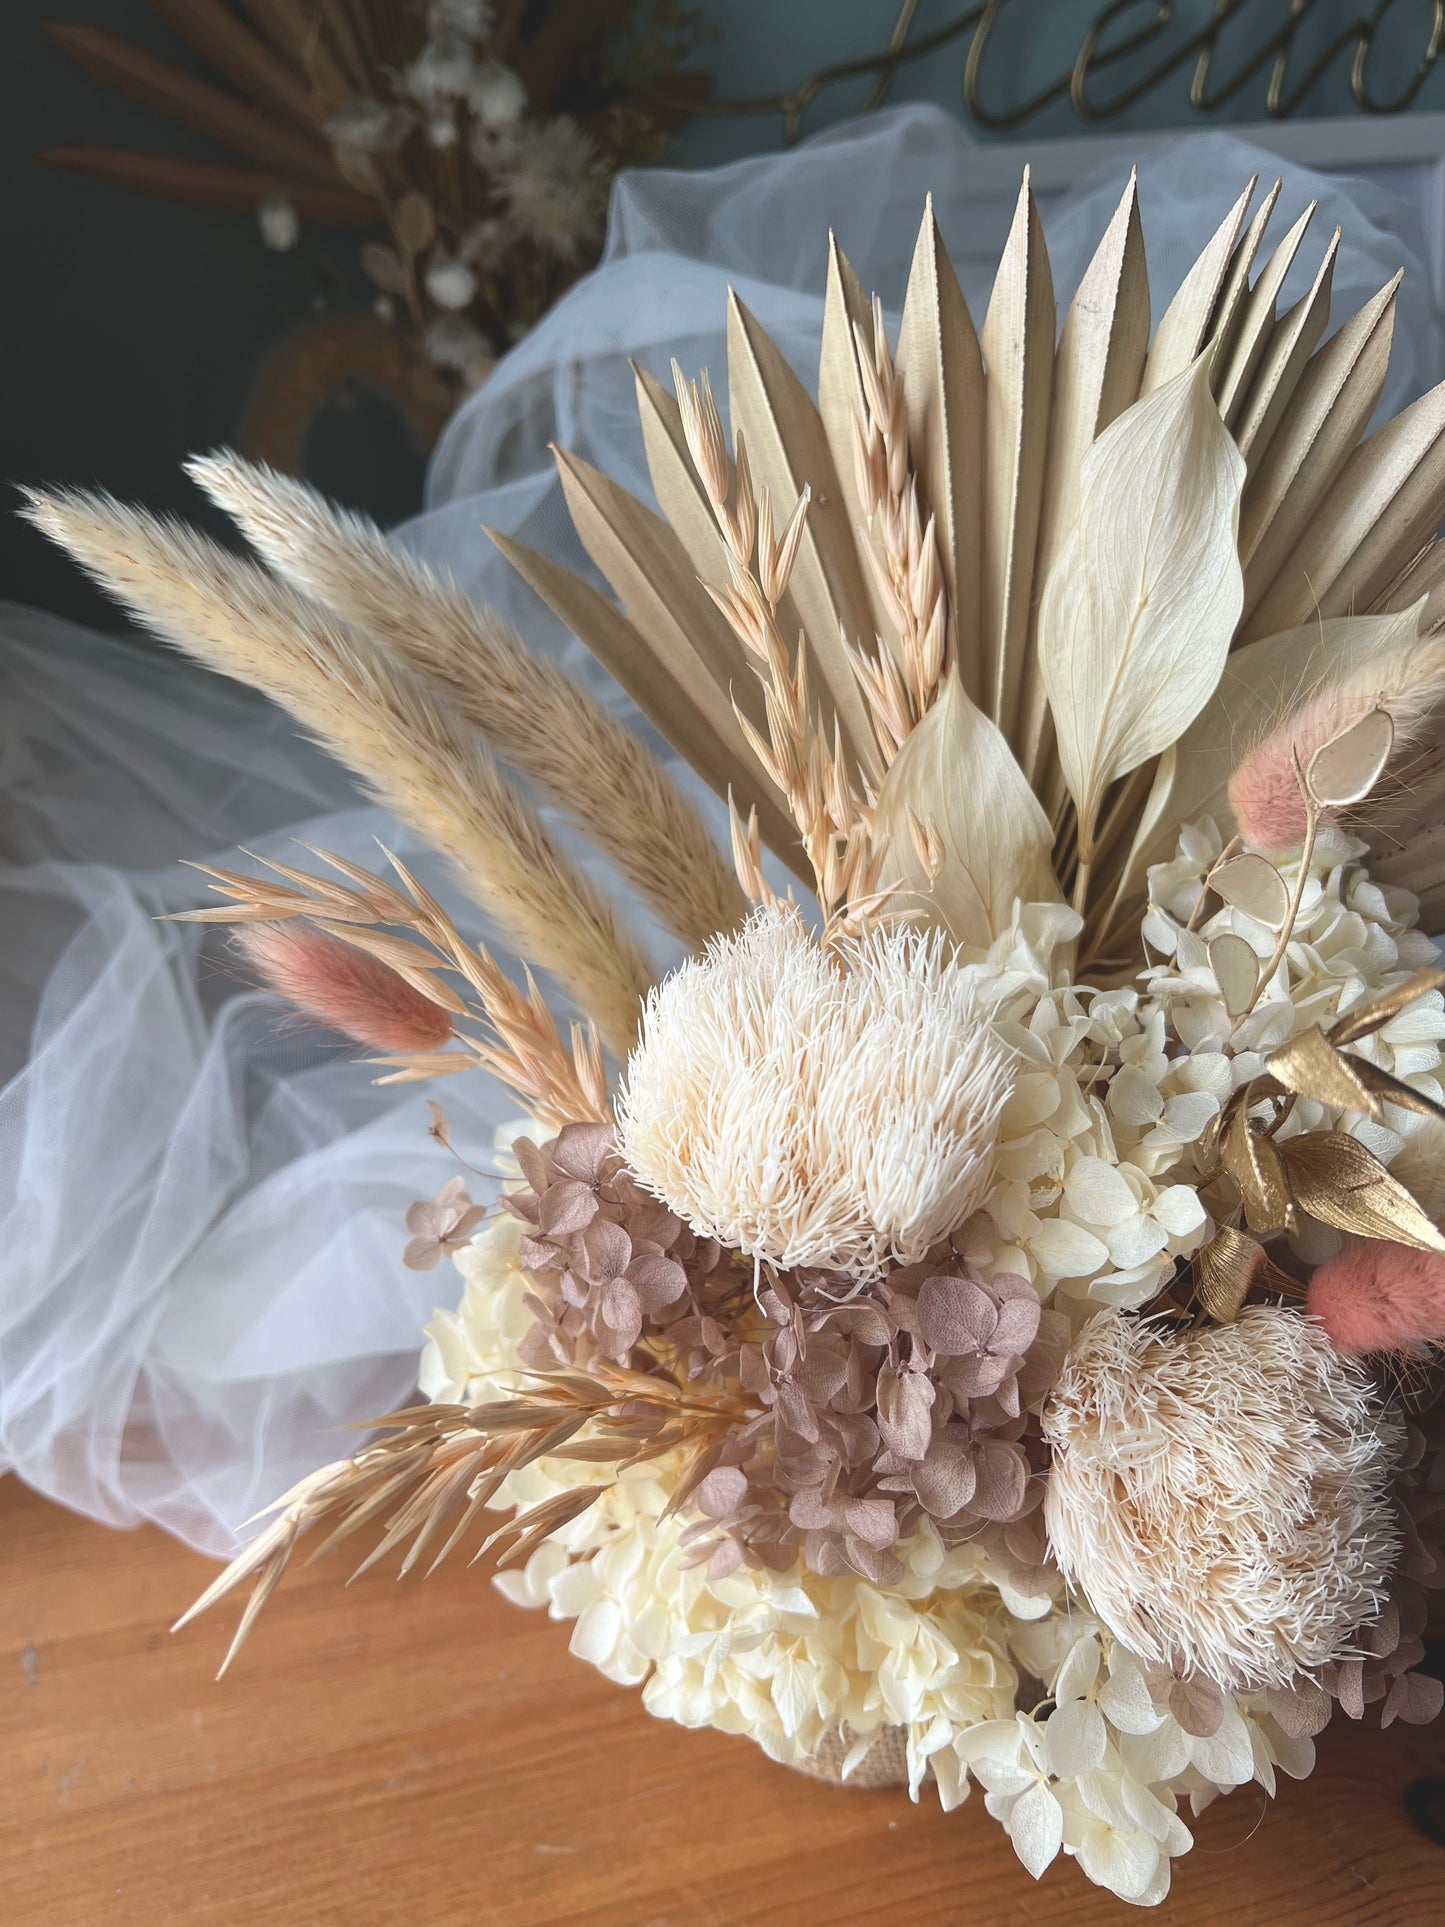 Boho Style Dried Flower Arrangement, Boho House Floral Decoration Ivory and Earthy Tones with Hessian Pot